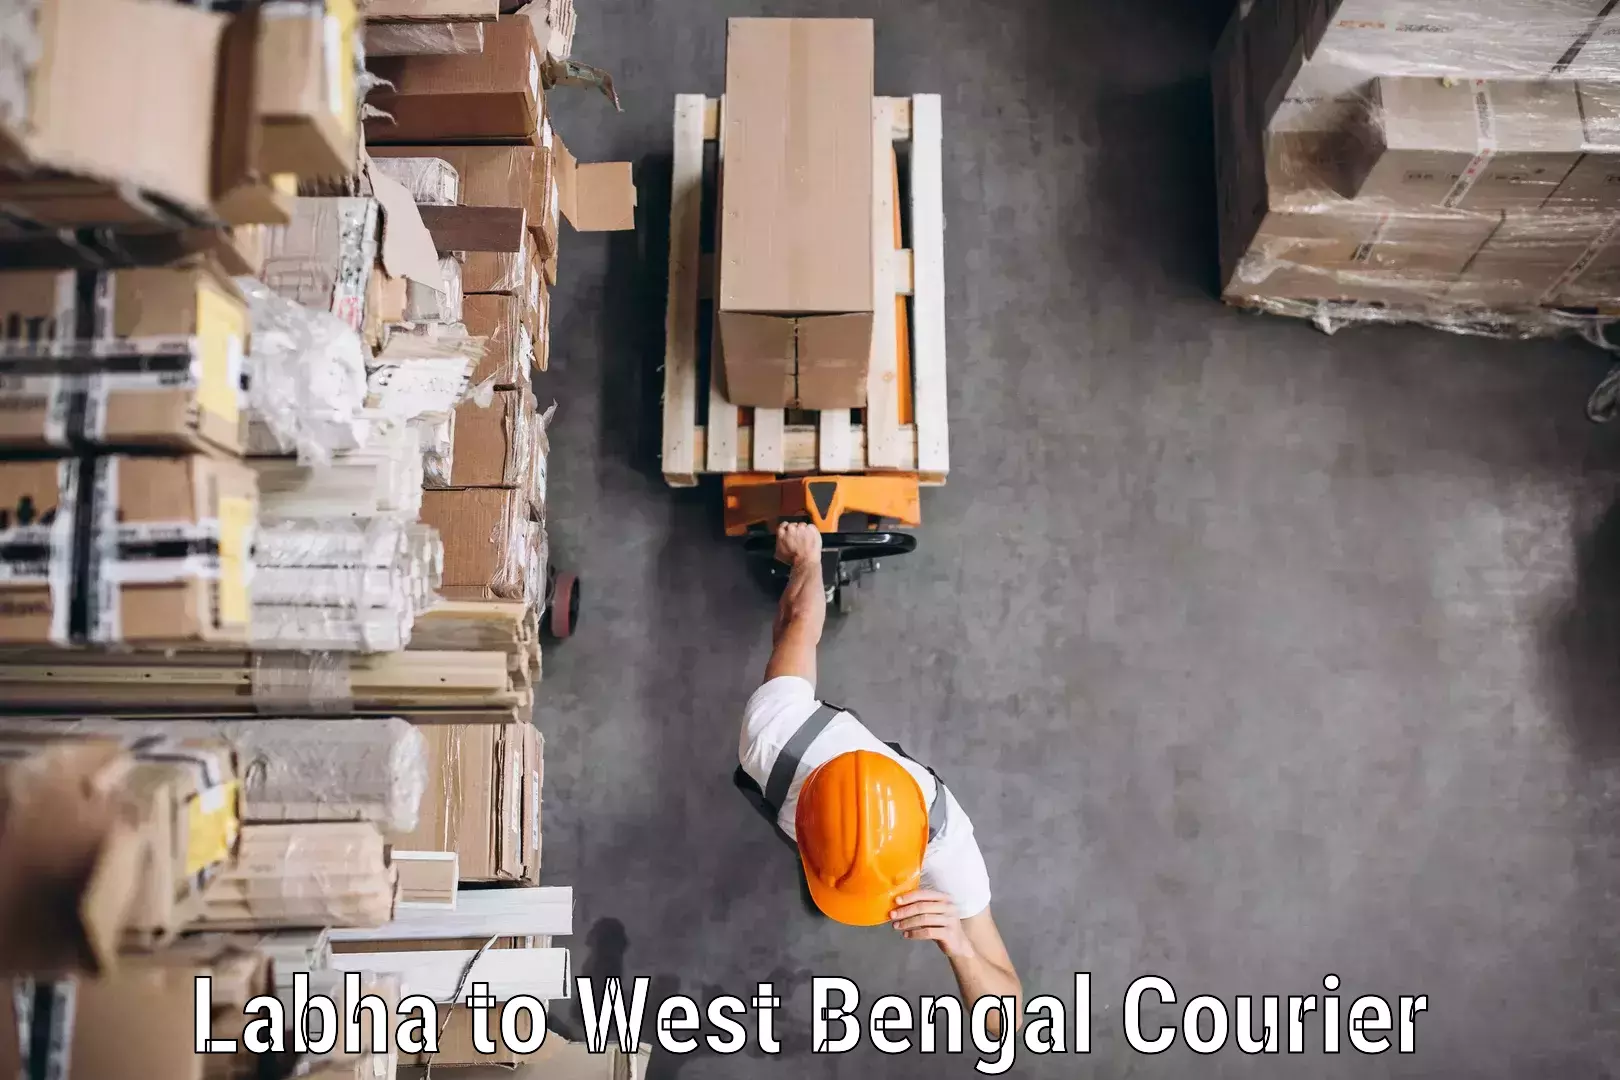 Courier service booking Labha to West Bengal